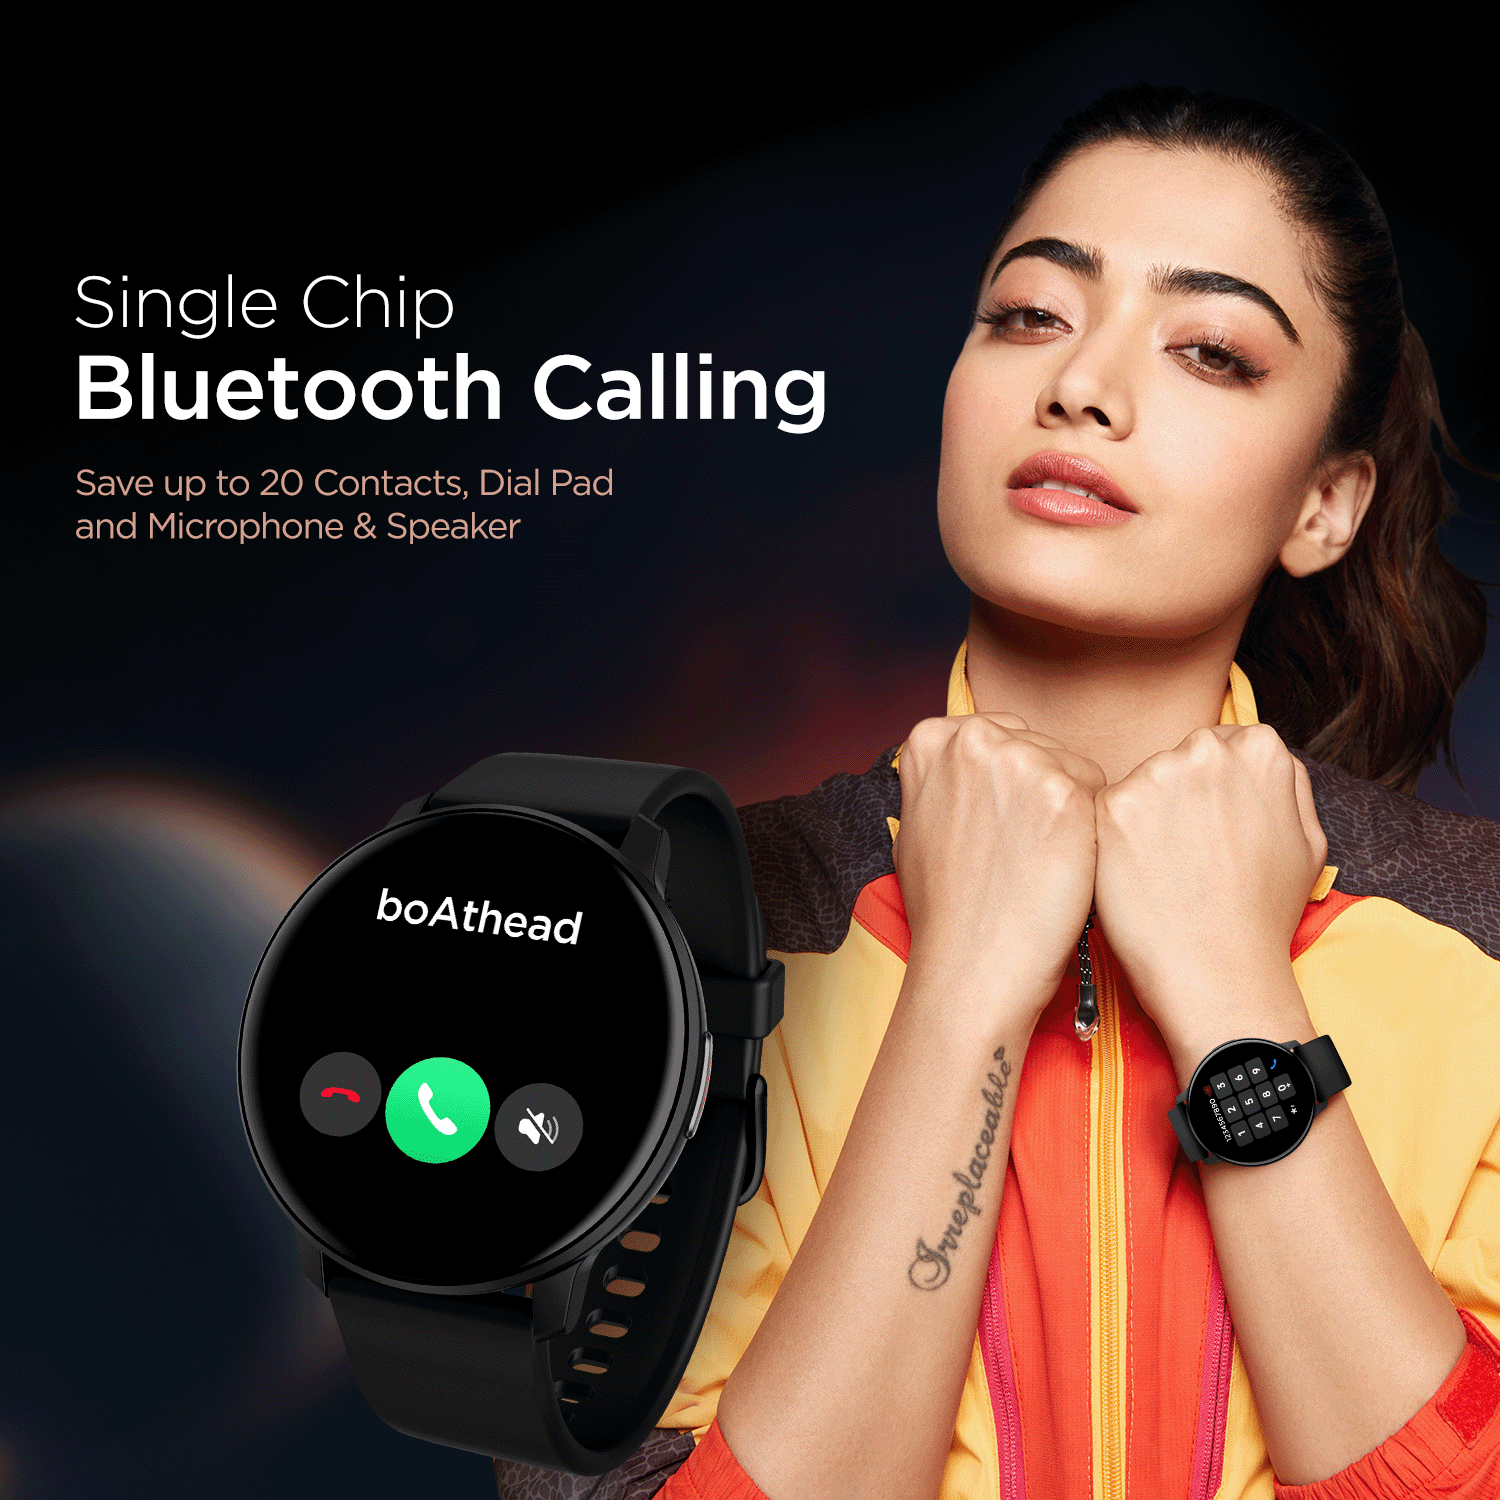 boAt Lunar Connect | Round Dial Smart Watch with 1.28” (3.25 cm) HD Display, BT Calling, Supports Hindi & English Language, Up to 20 contacts, 100+ Sports Modes